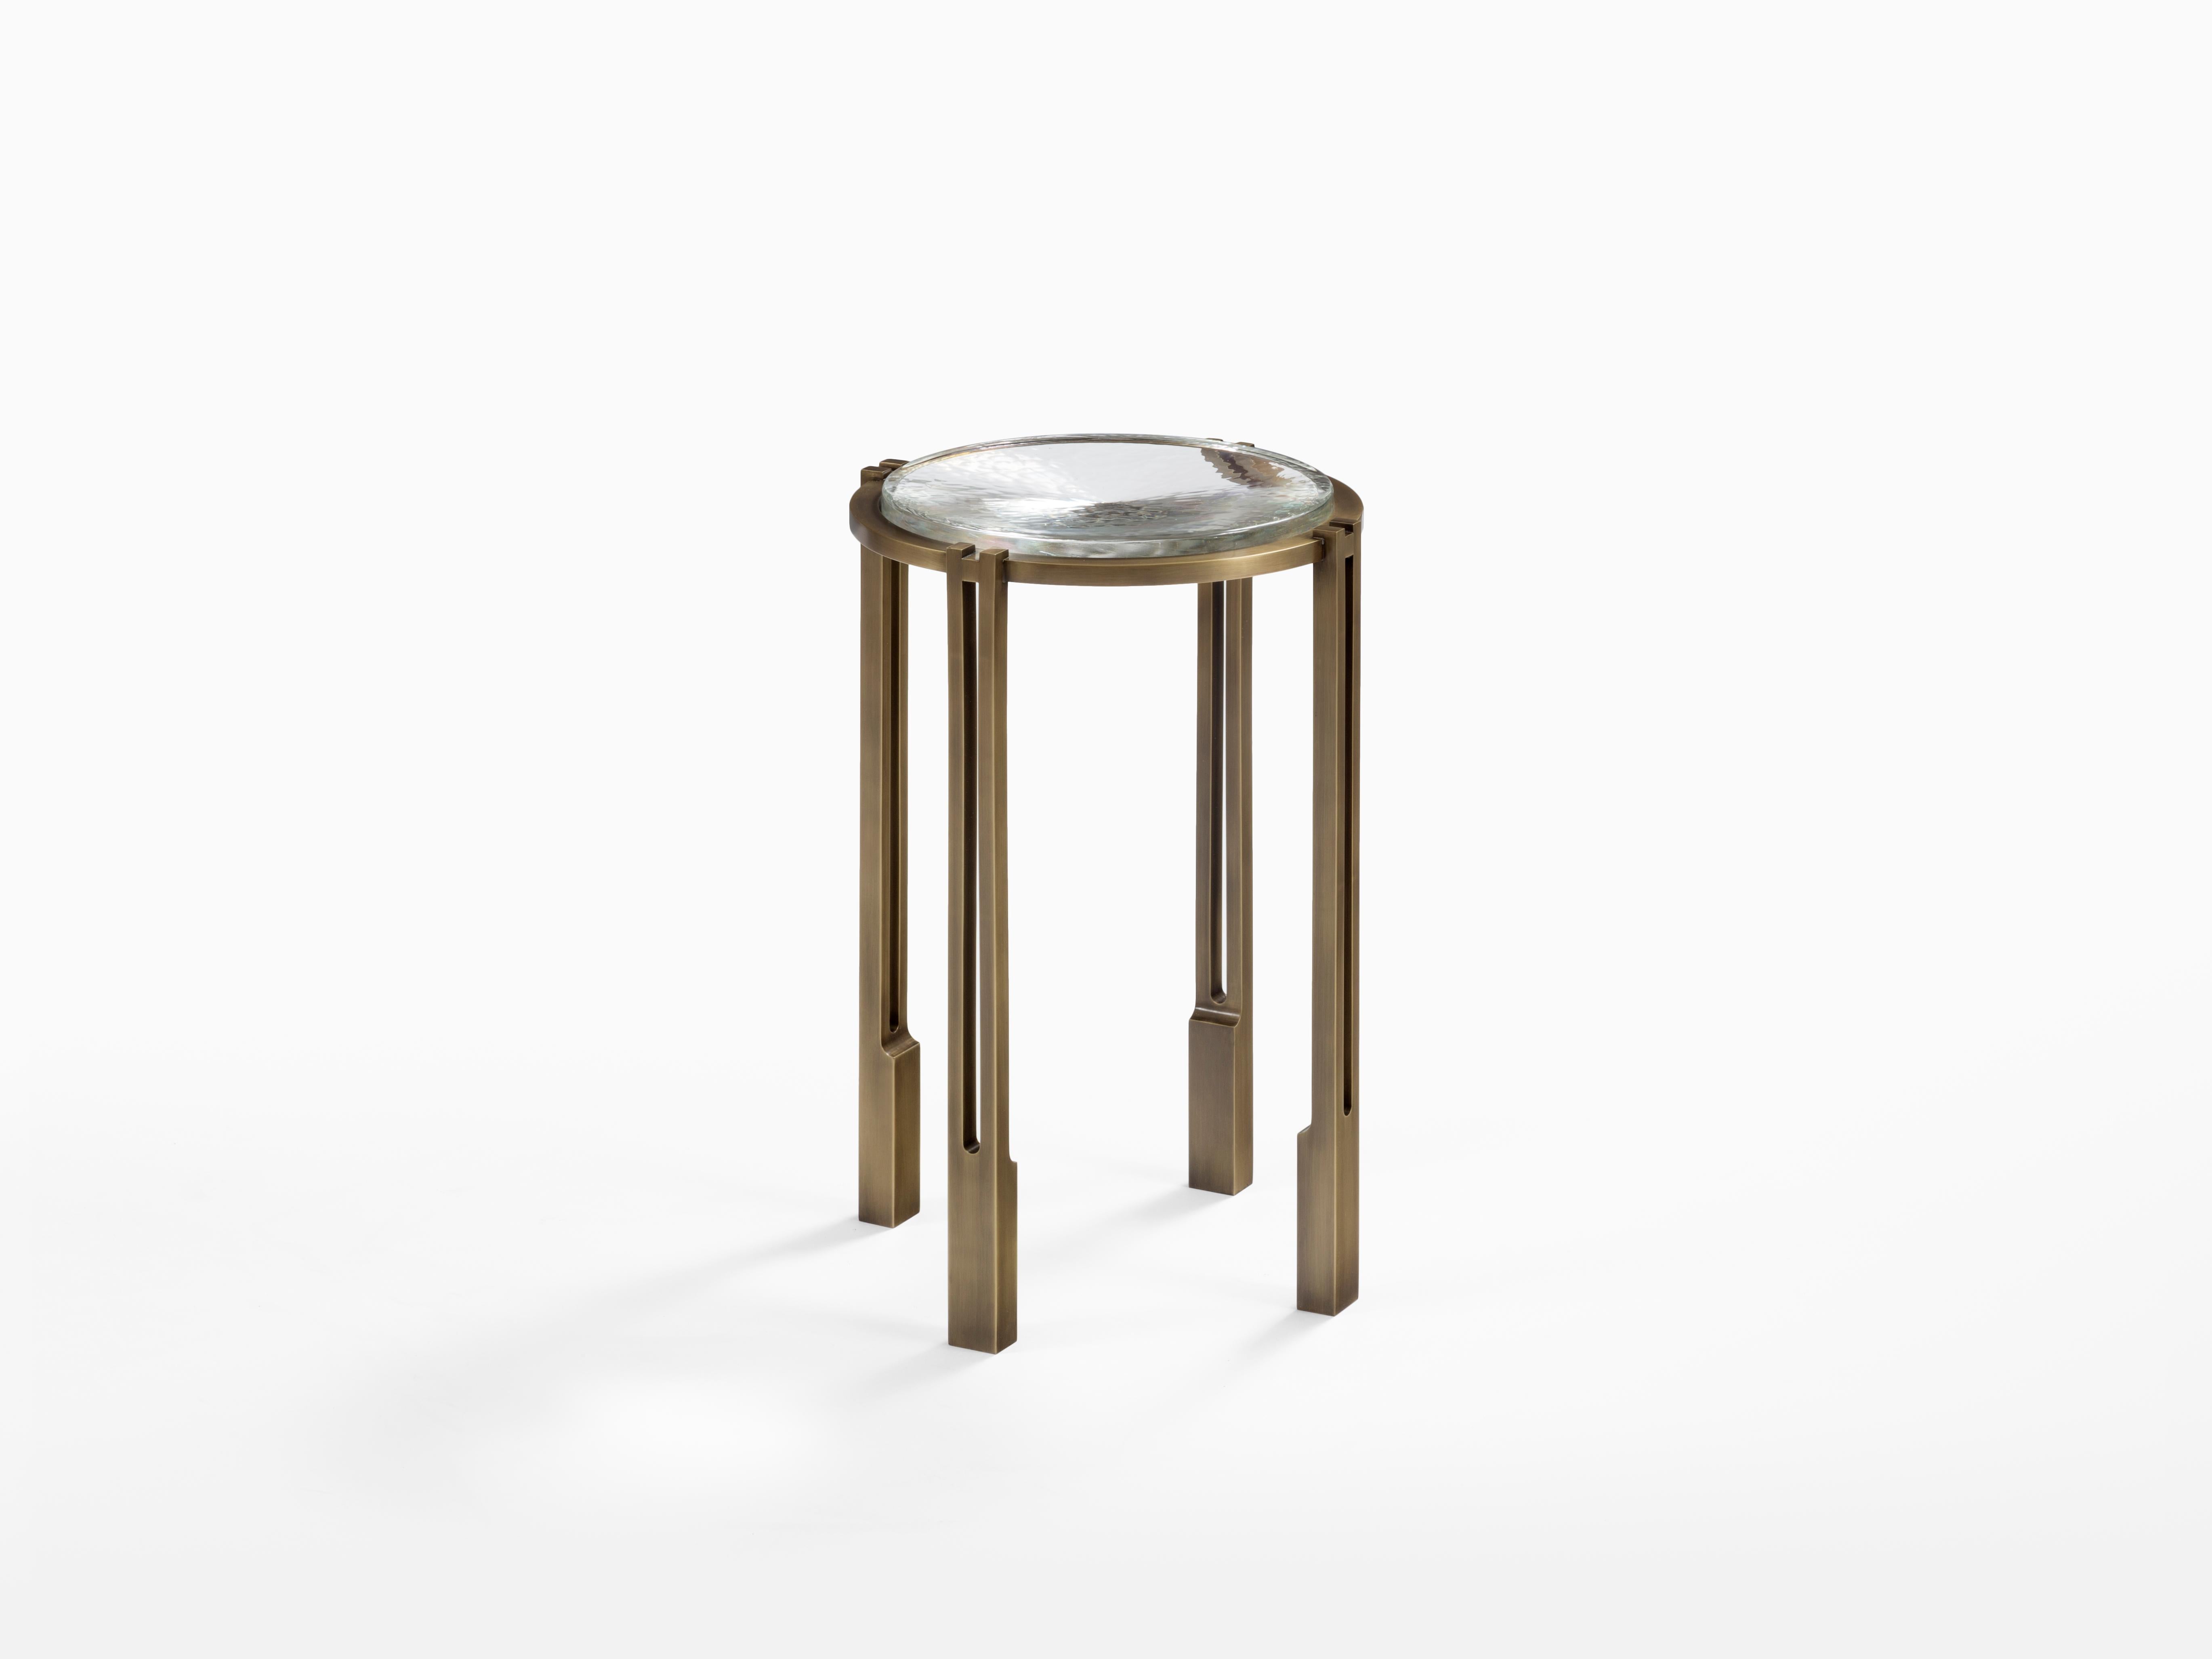 Metal and cast glass strike the perfect balance in the alter occasional table by Chai Ming Studios. Produced by our craftspeople to exacting standards, the architectural metal frame is expertly detailed and highlights the unique characteristics of